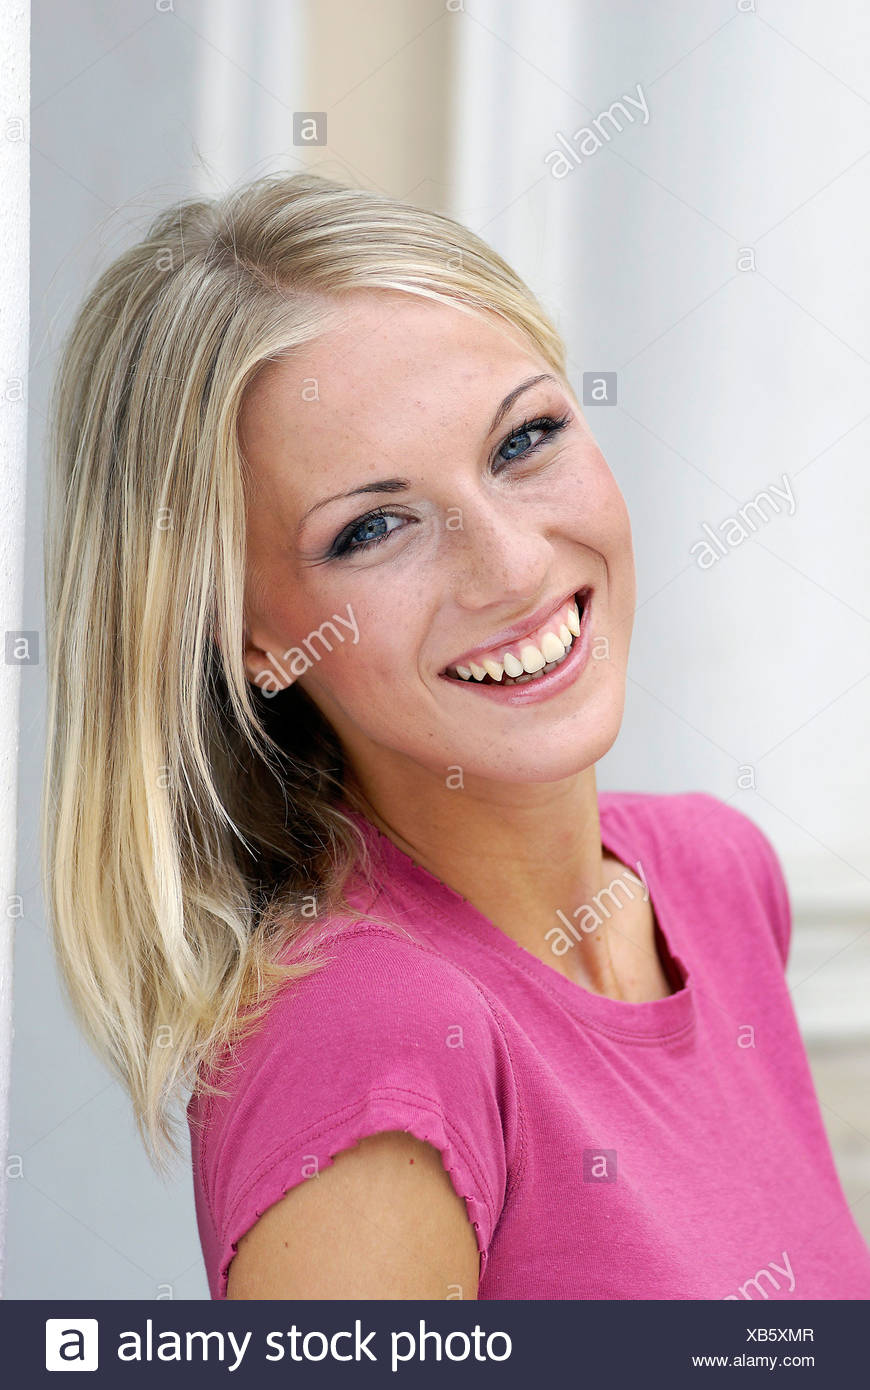 Female With Long Blonde Hair Wearing A Bright Pink Top And